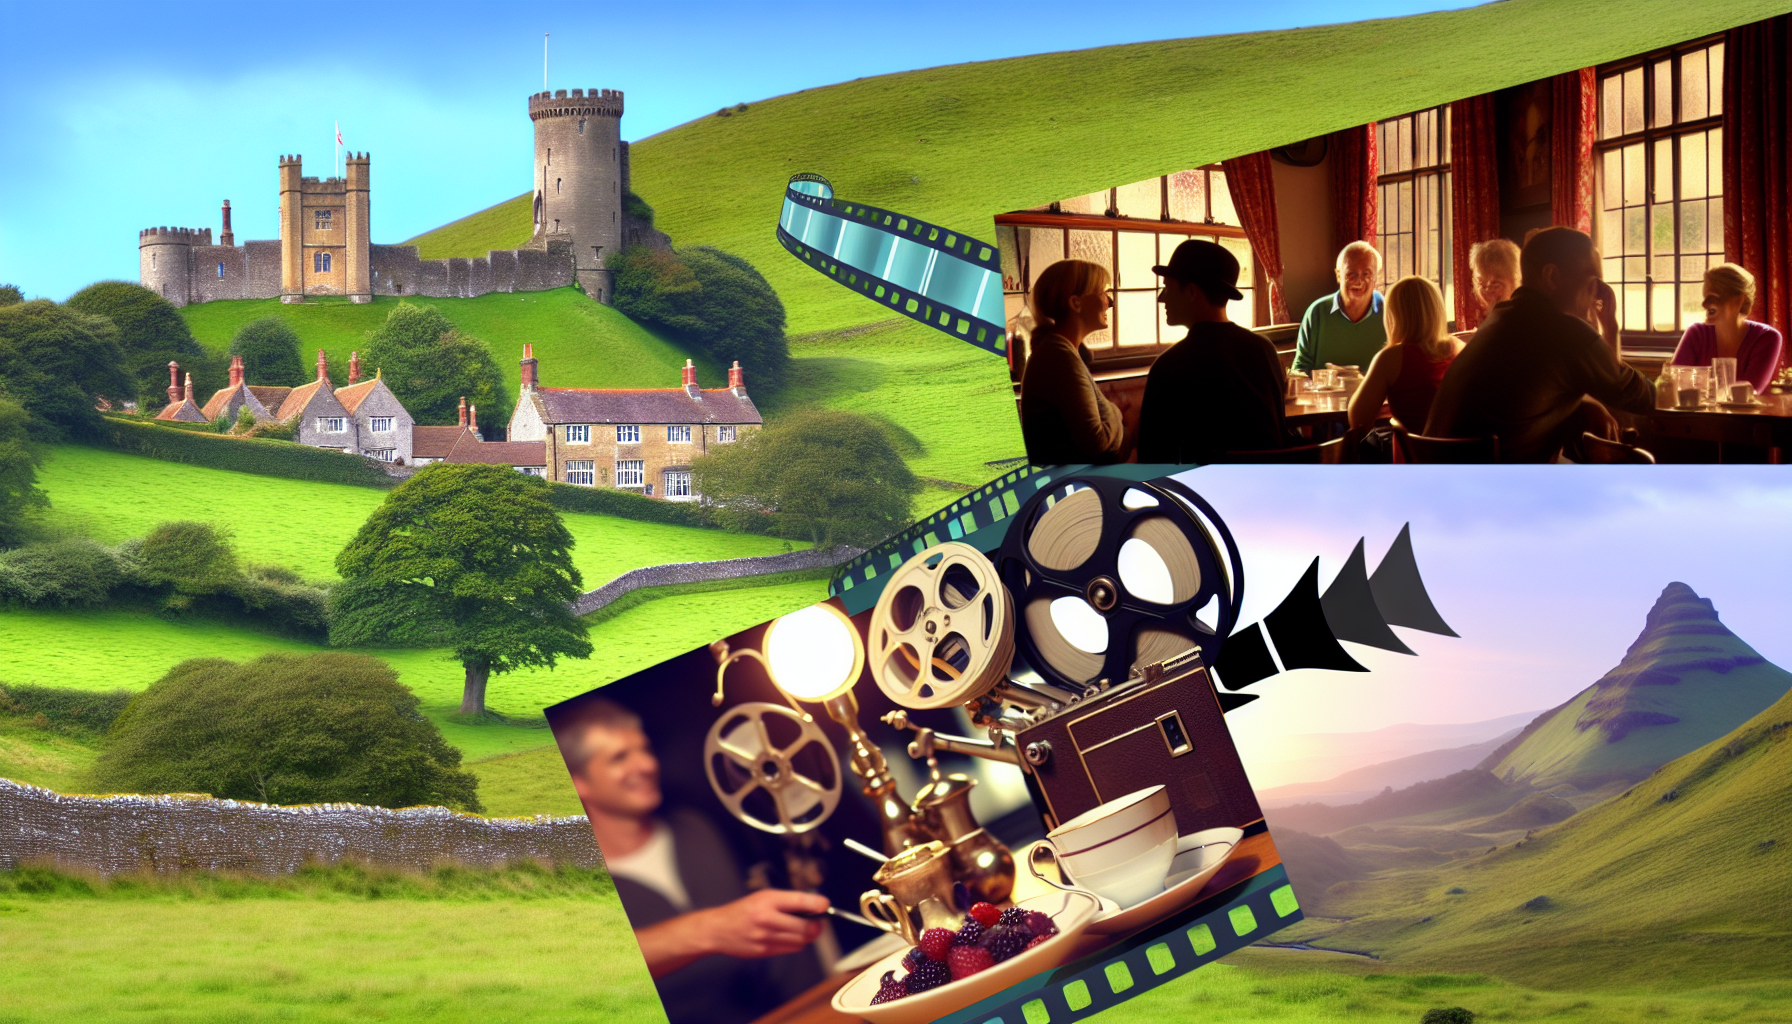 Experience cinematic magic and English hospitality at England's iconic filming locations